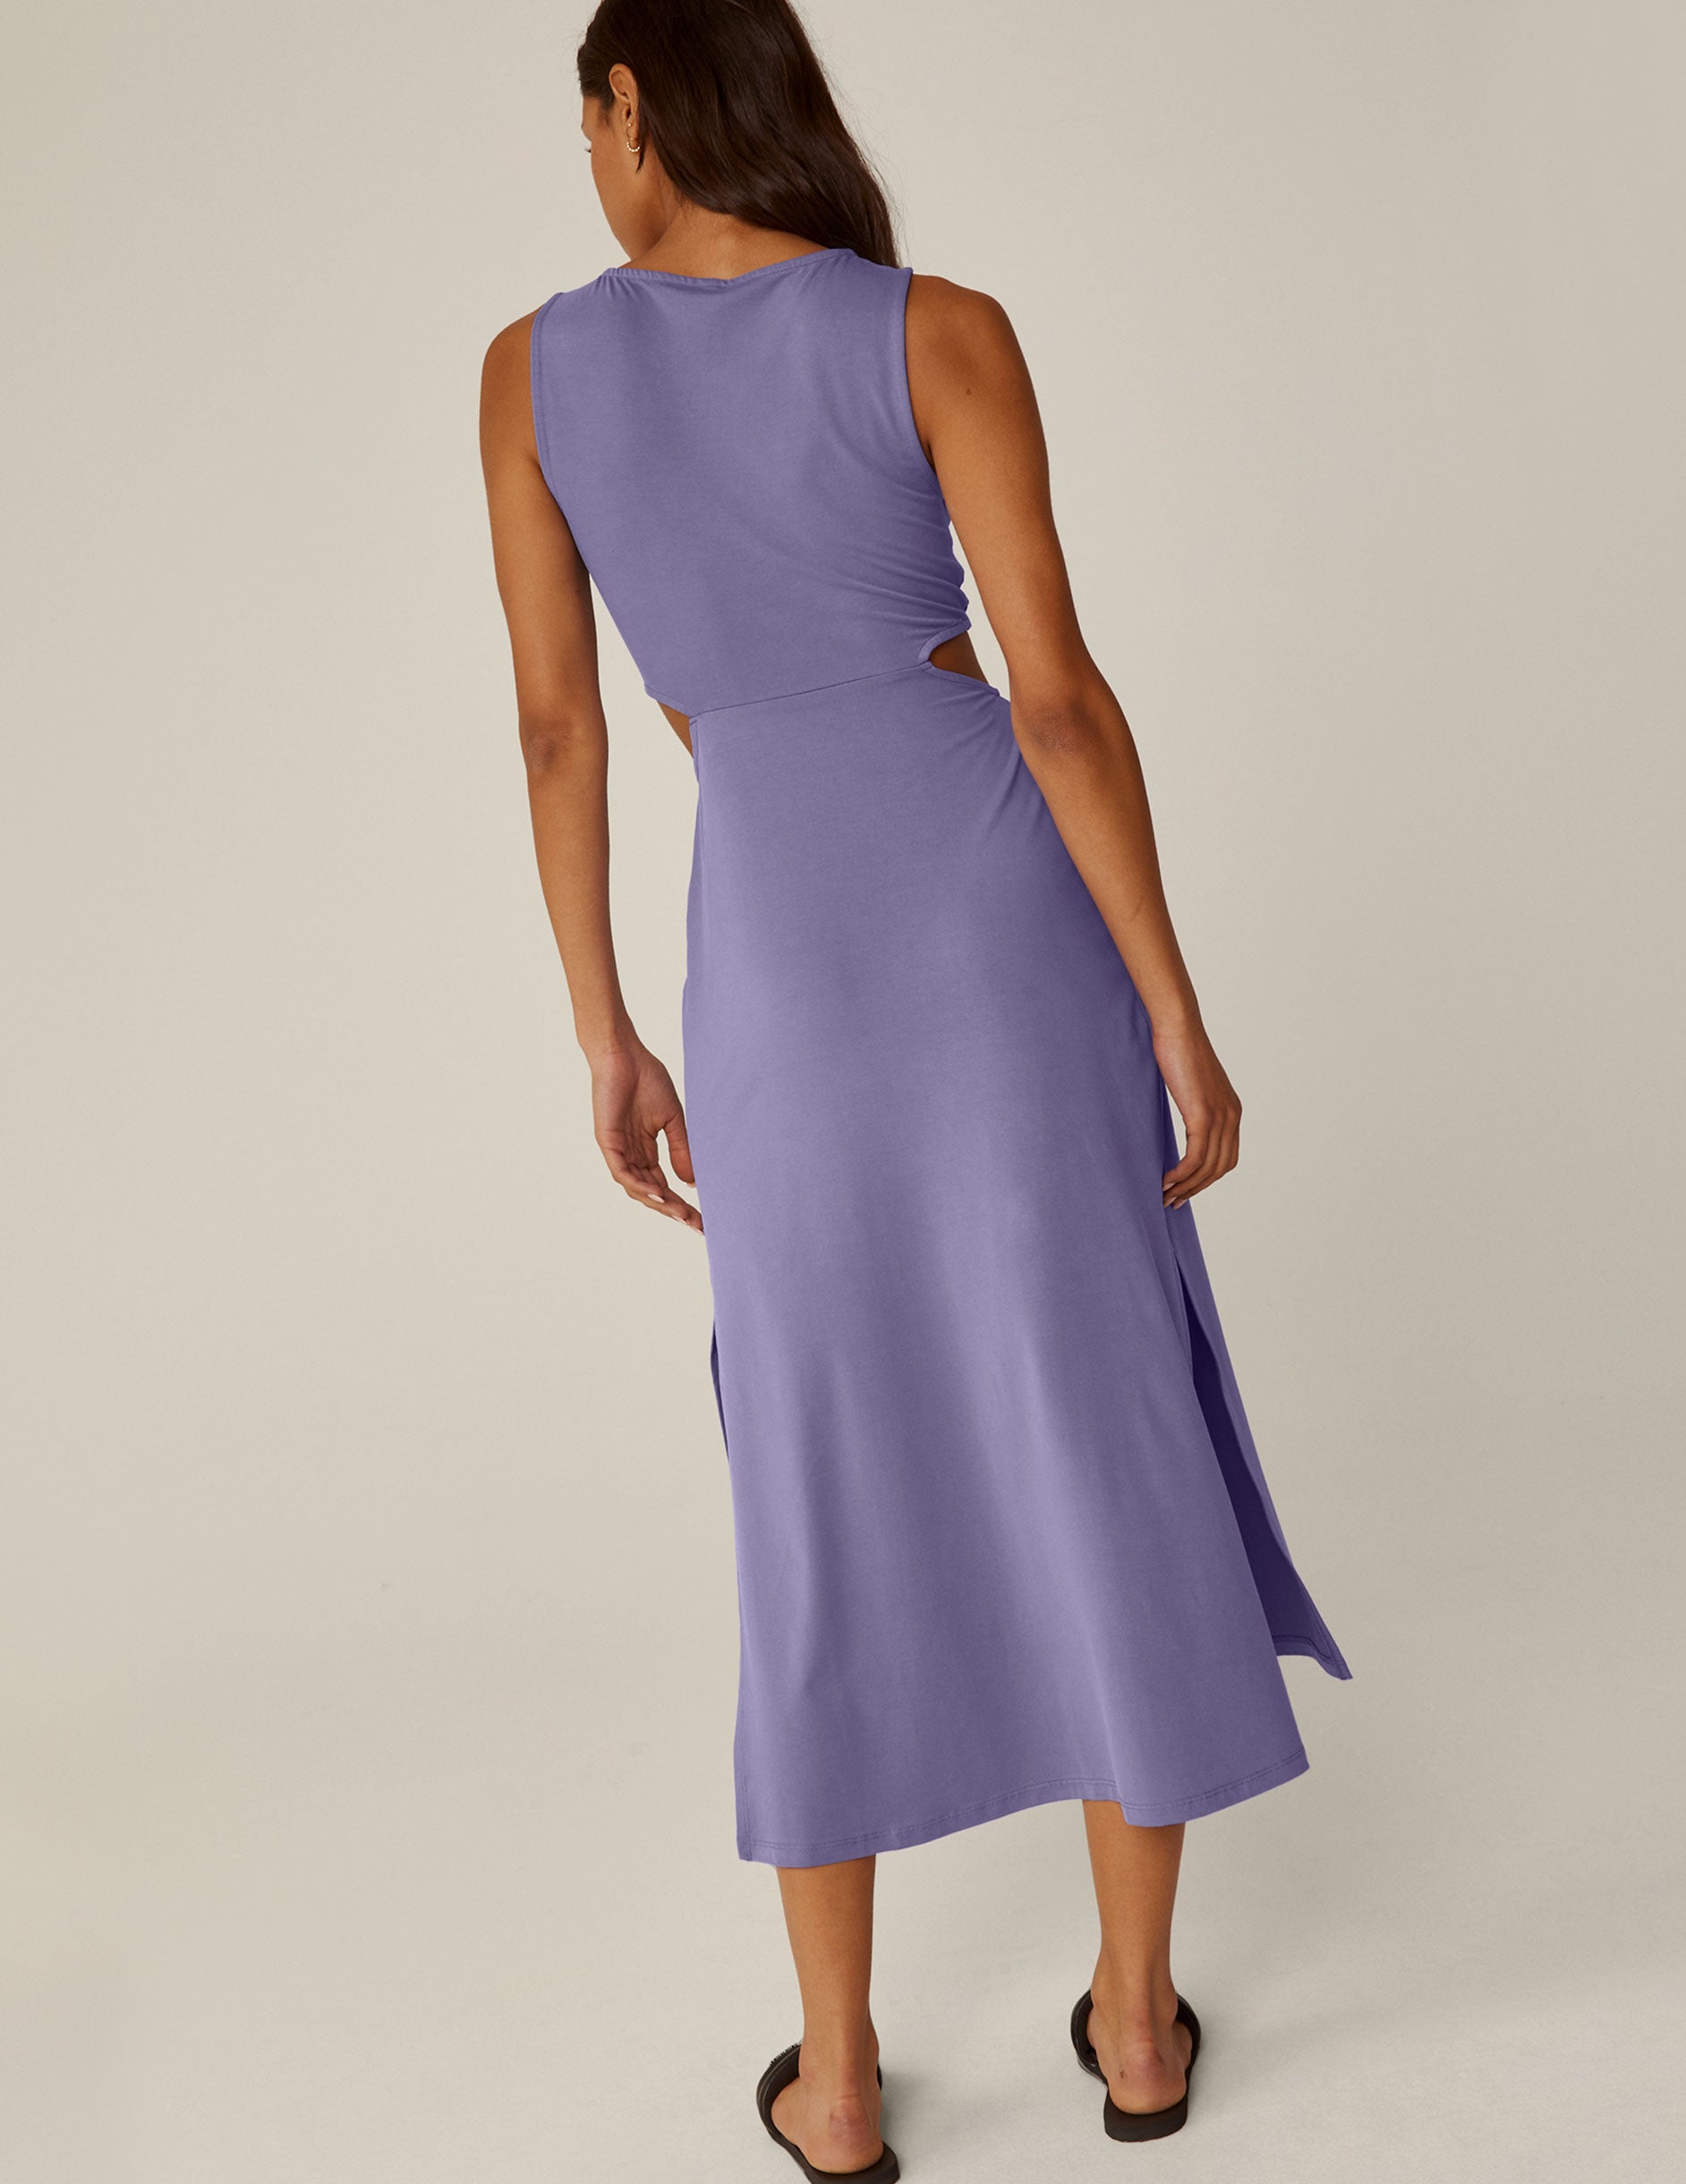 purple maxi dress with cutouts at the waist.